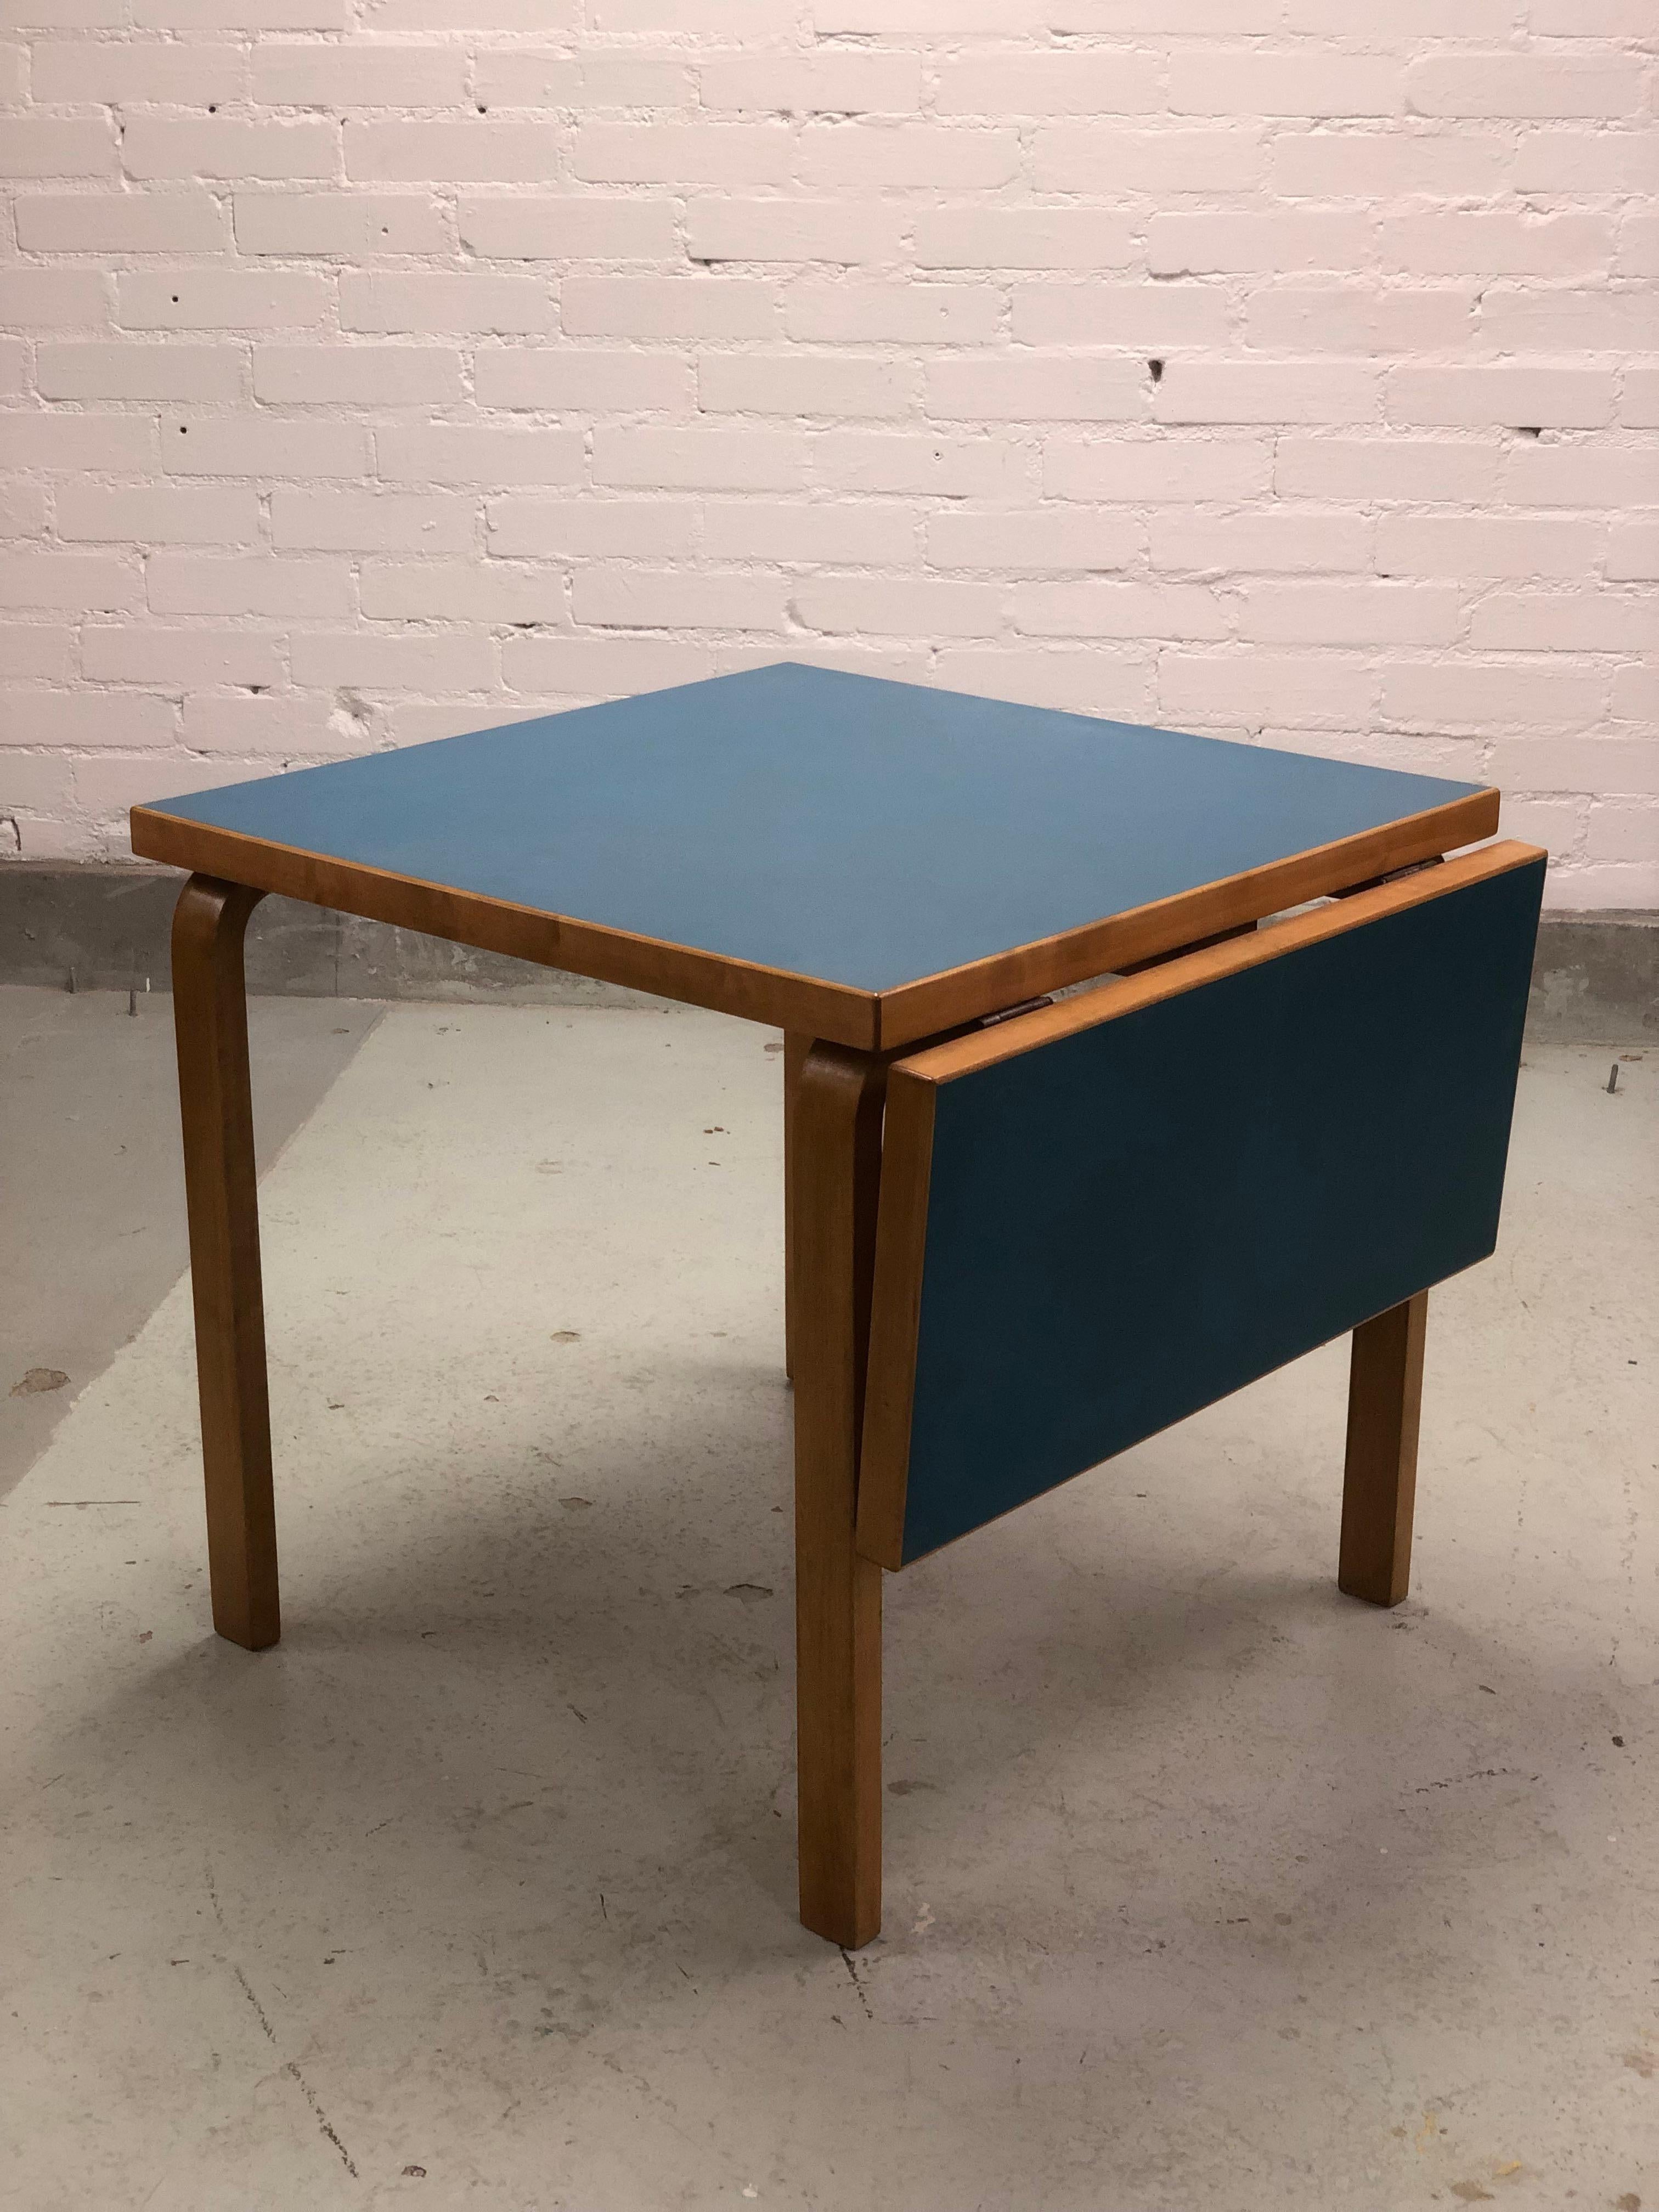 Alvar Aalto foldable table in birch with beautiful blue linoleum surface, designed by Alvar Aalto and manufactured by Artek in the 1950s. The materials used by Artek were very duarble and lasted for years and years in good condition regardless of